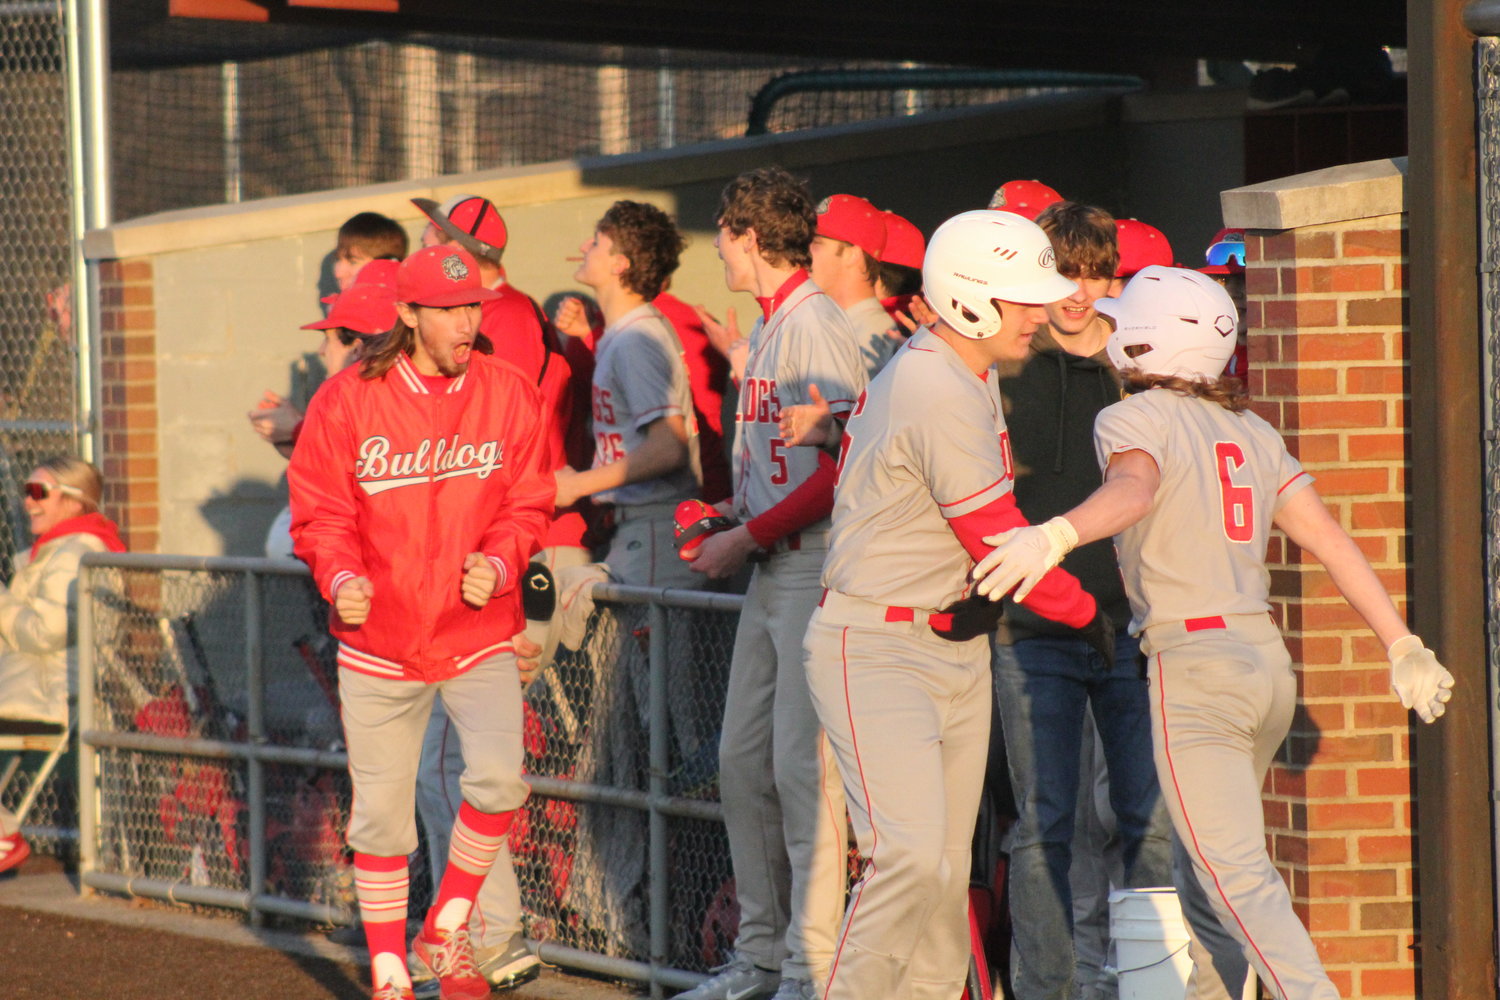 Mexico's dugout celebrates after senior Ty Sims drove in senior Landyn Kleinsorge (6) to tie the game at 7 in the seventh inning against Kirksville on Tuesday in Mexico.